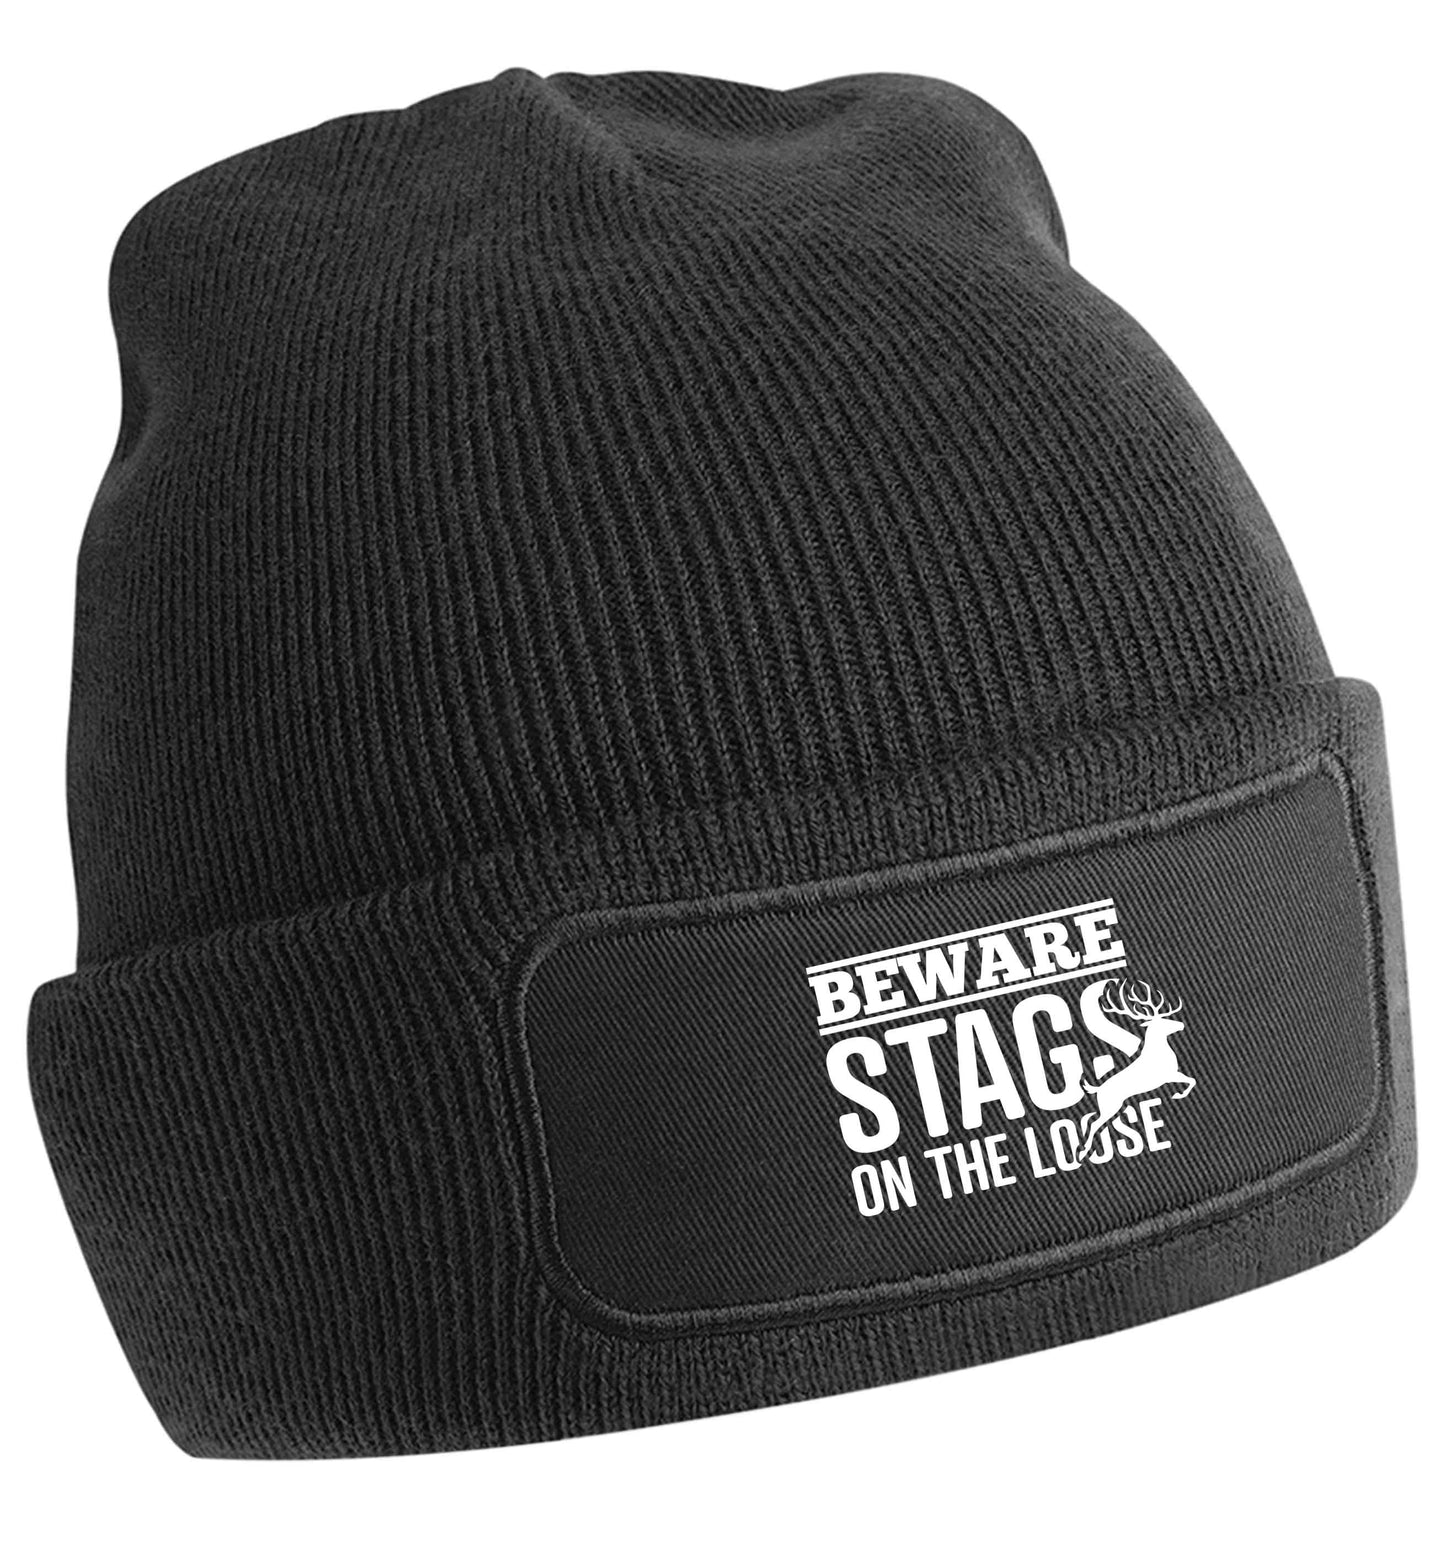 Beware stags on the loose | Beanie hat